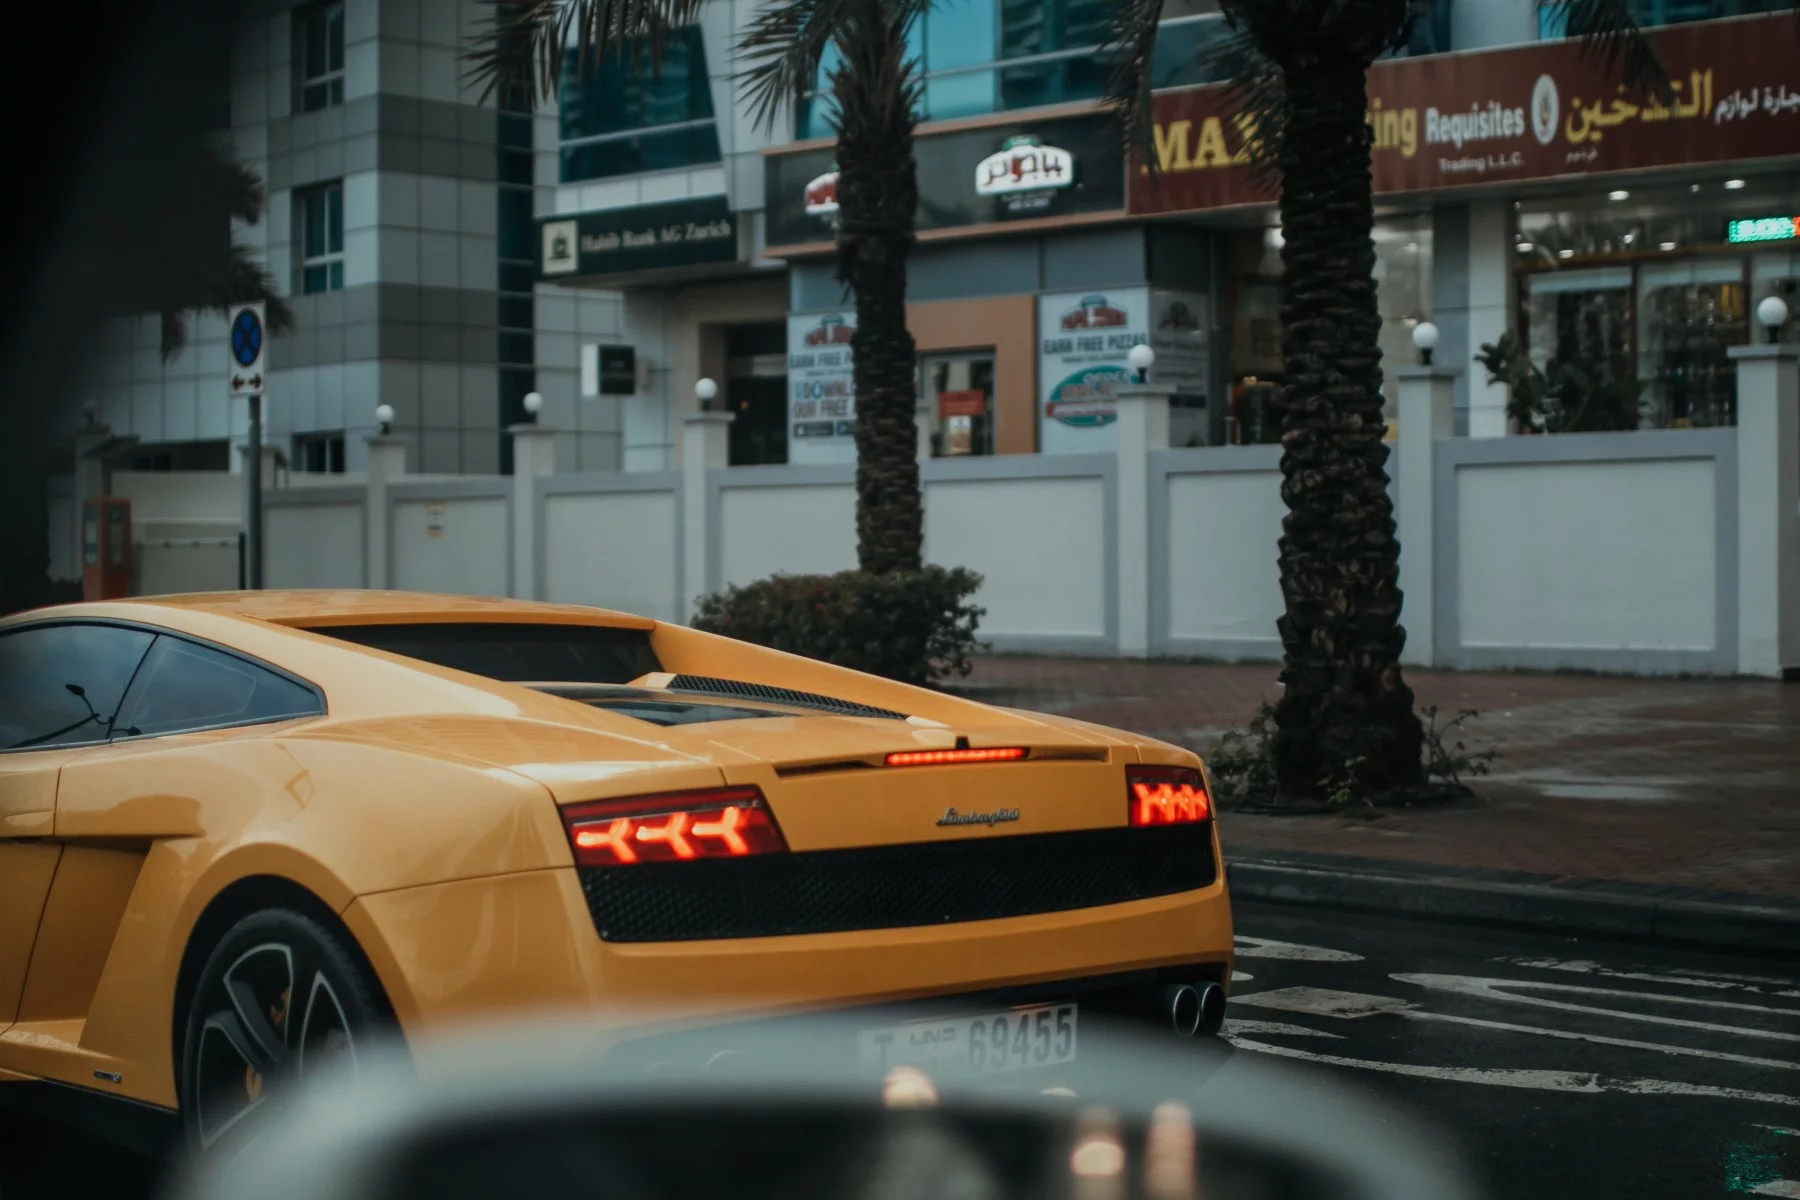 Expensive-looking Lamborghini sports car driving in the streets of the UAE.